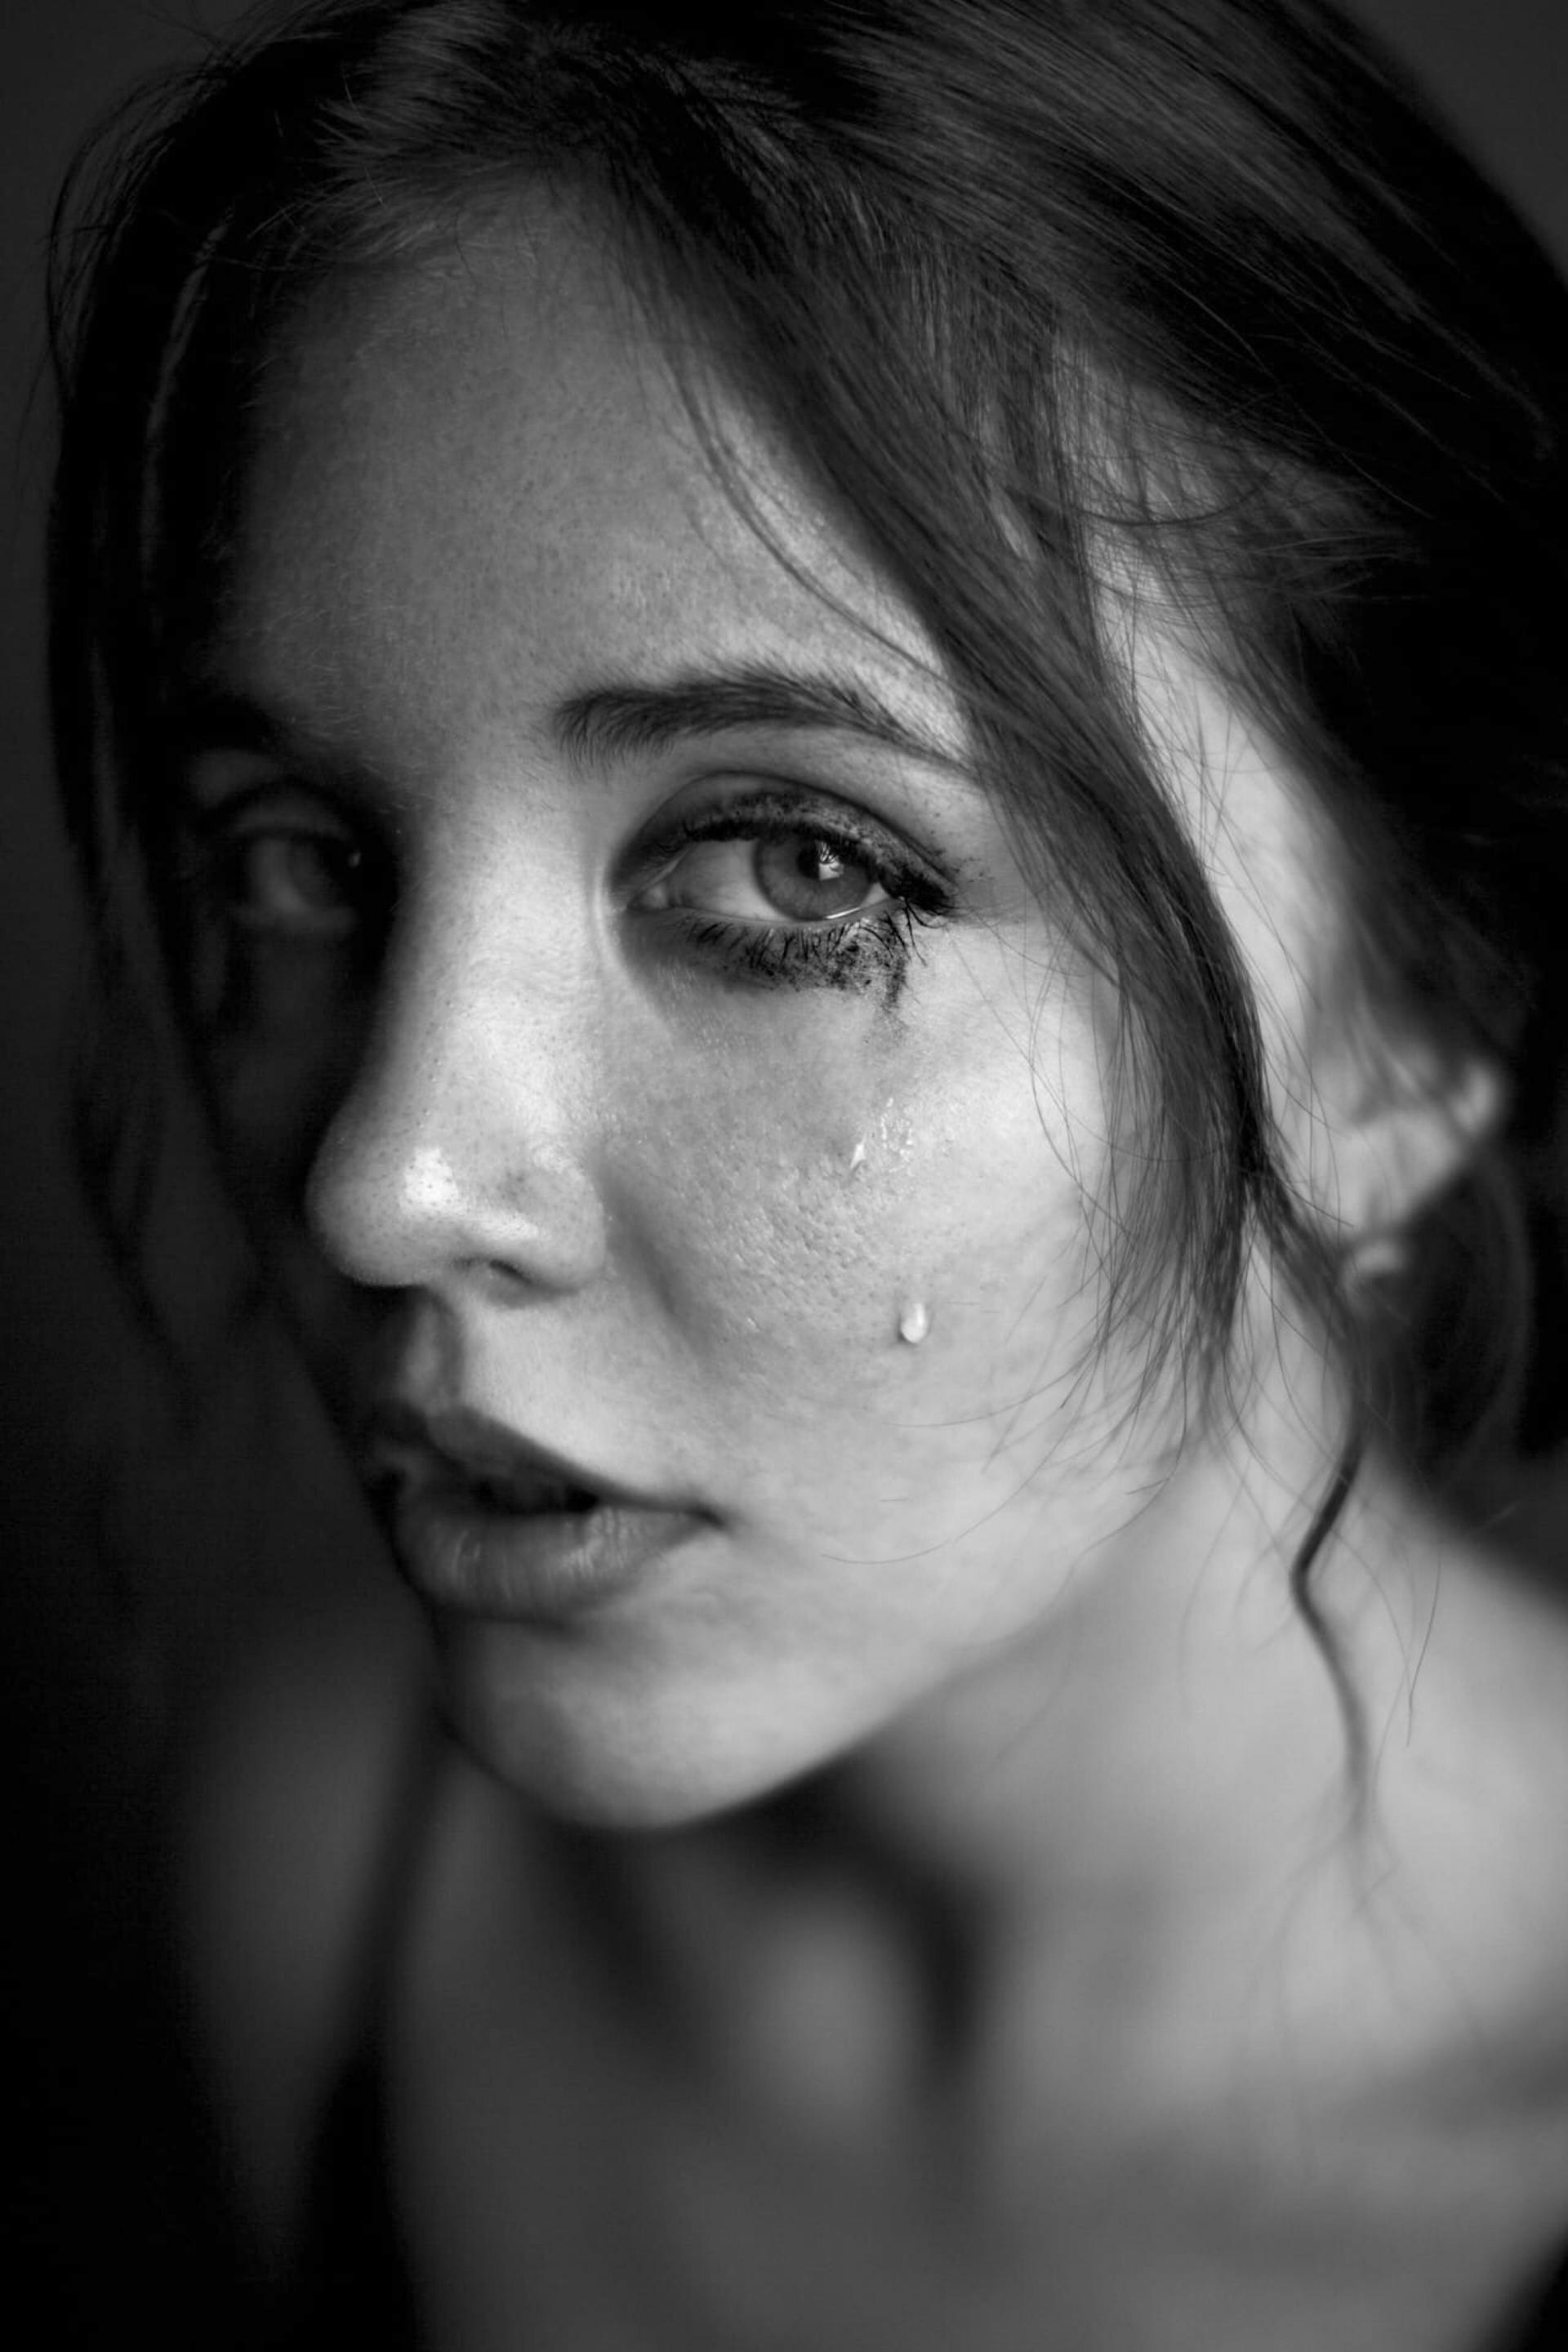 A close-up of a woman crying | Source: Pexels